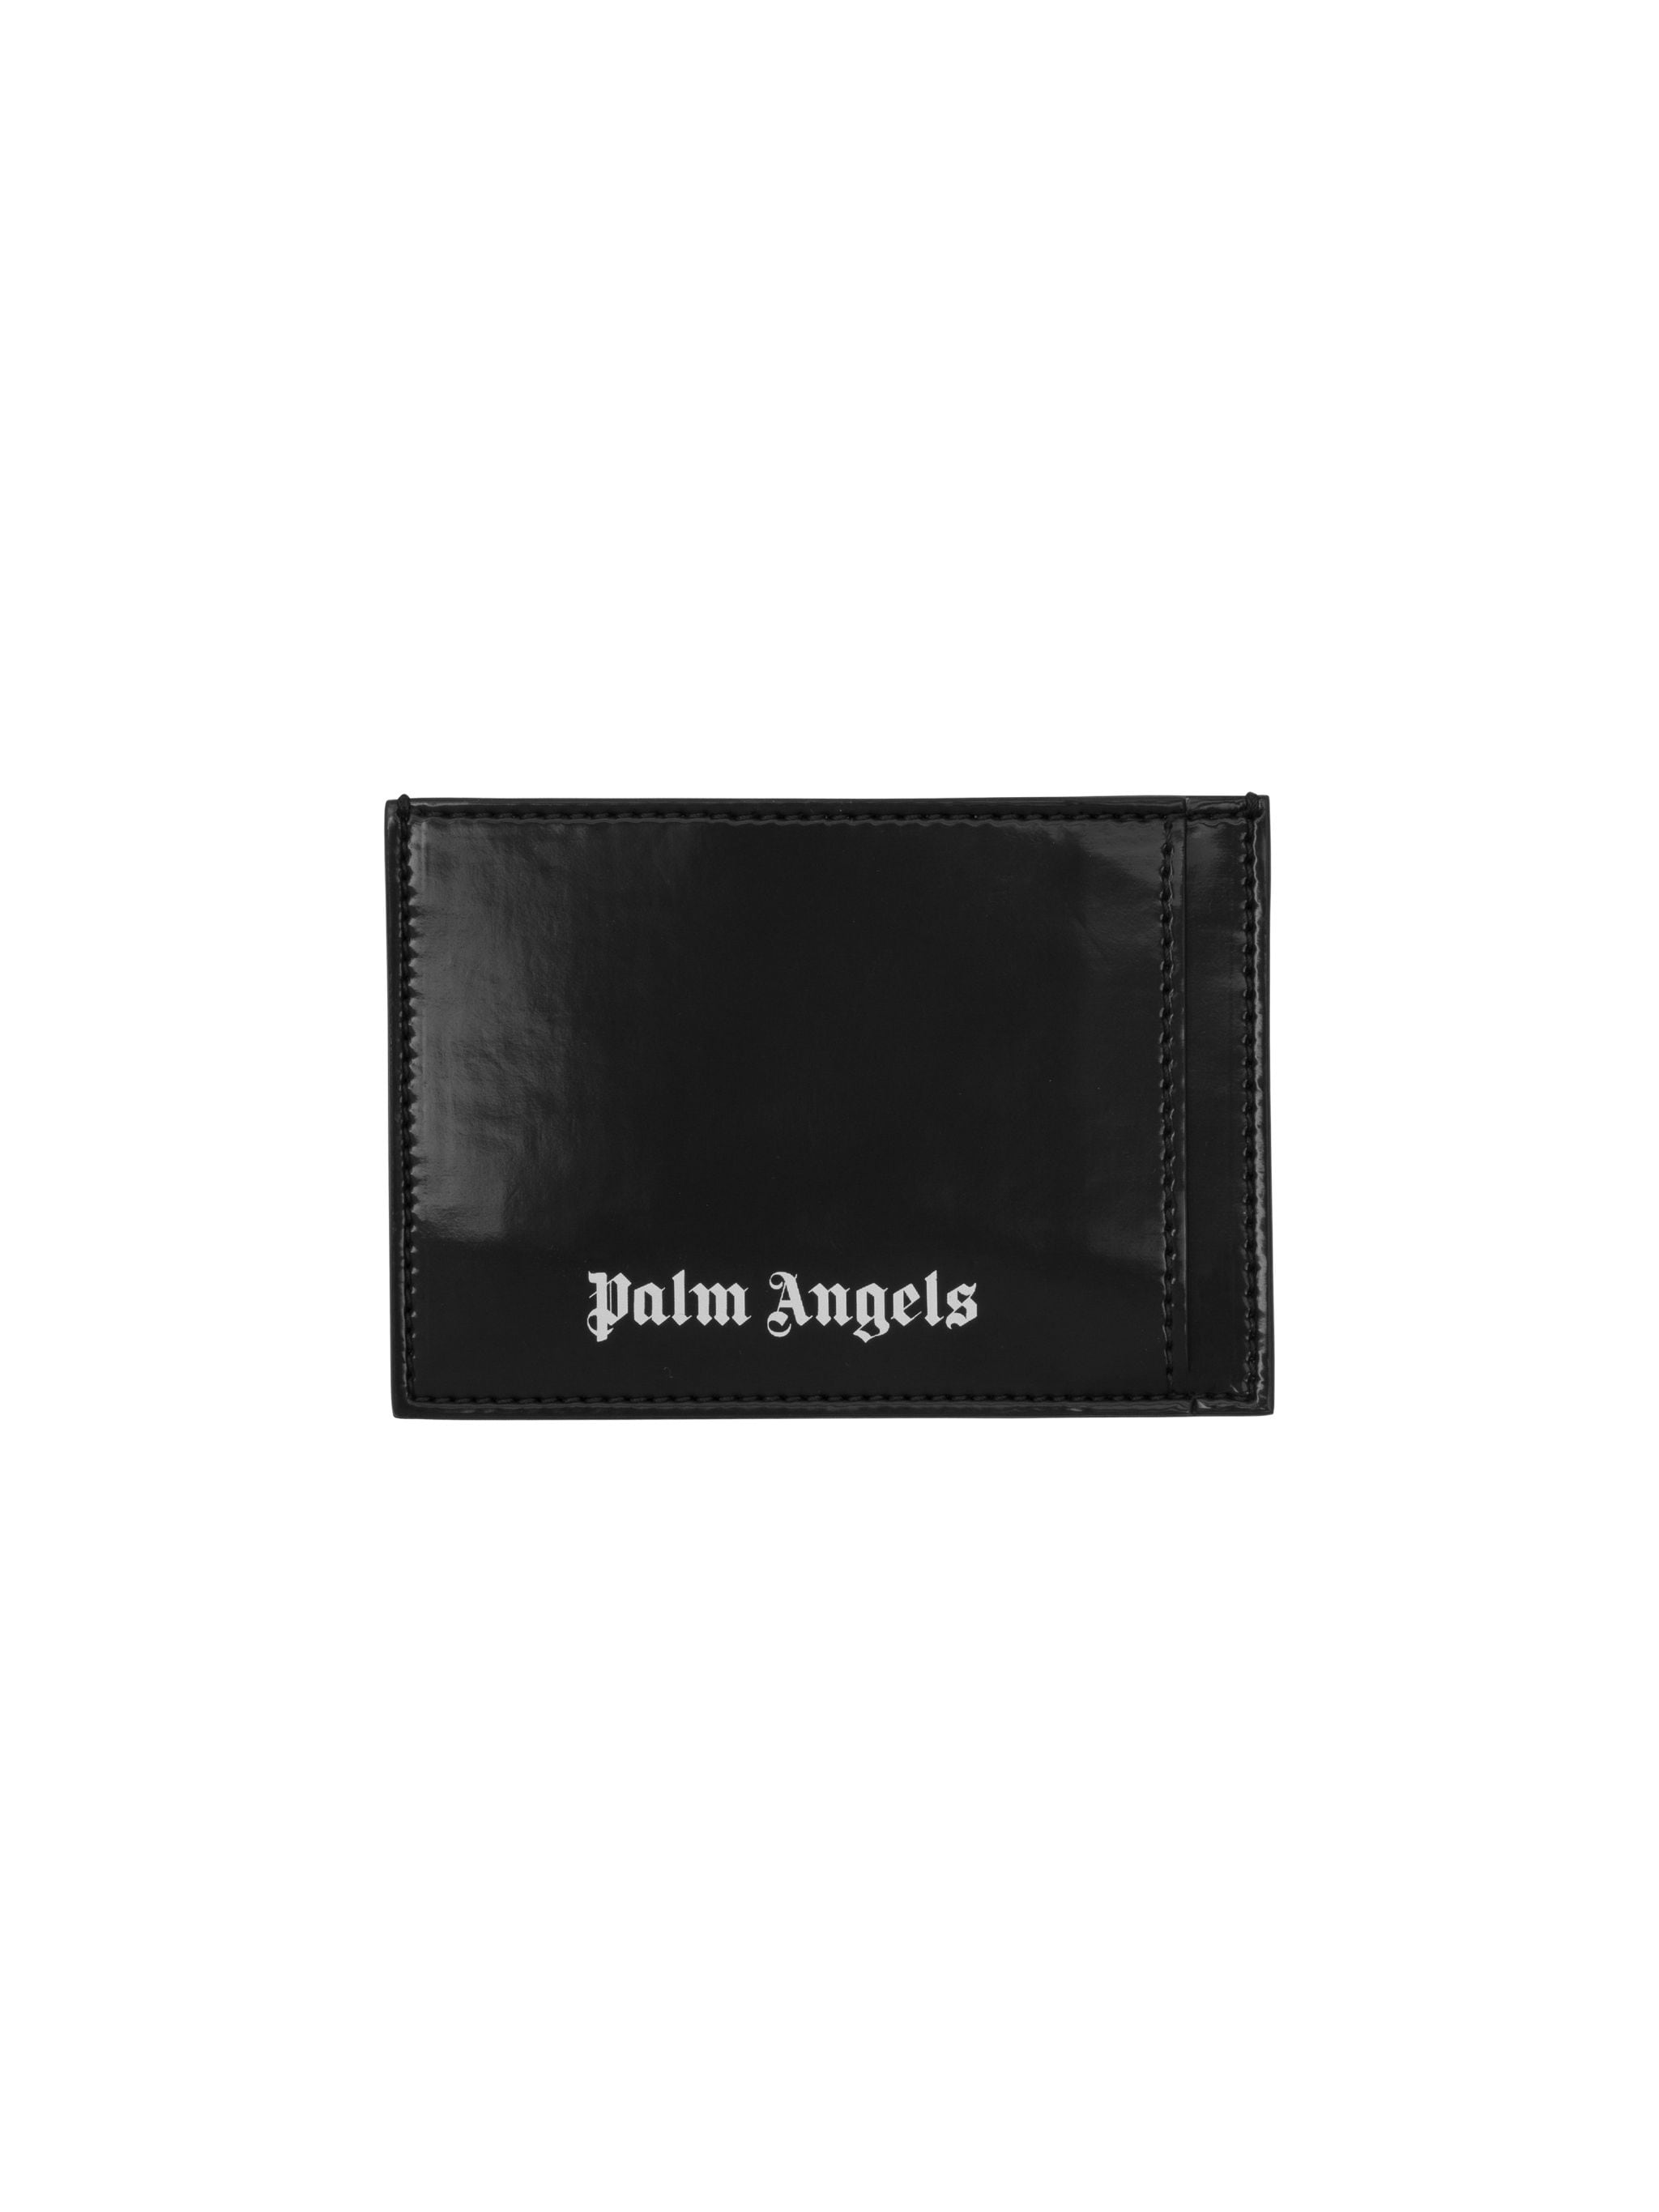 Wallets & Cardholders - Palm Angels Official Website